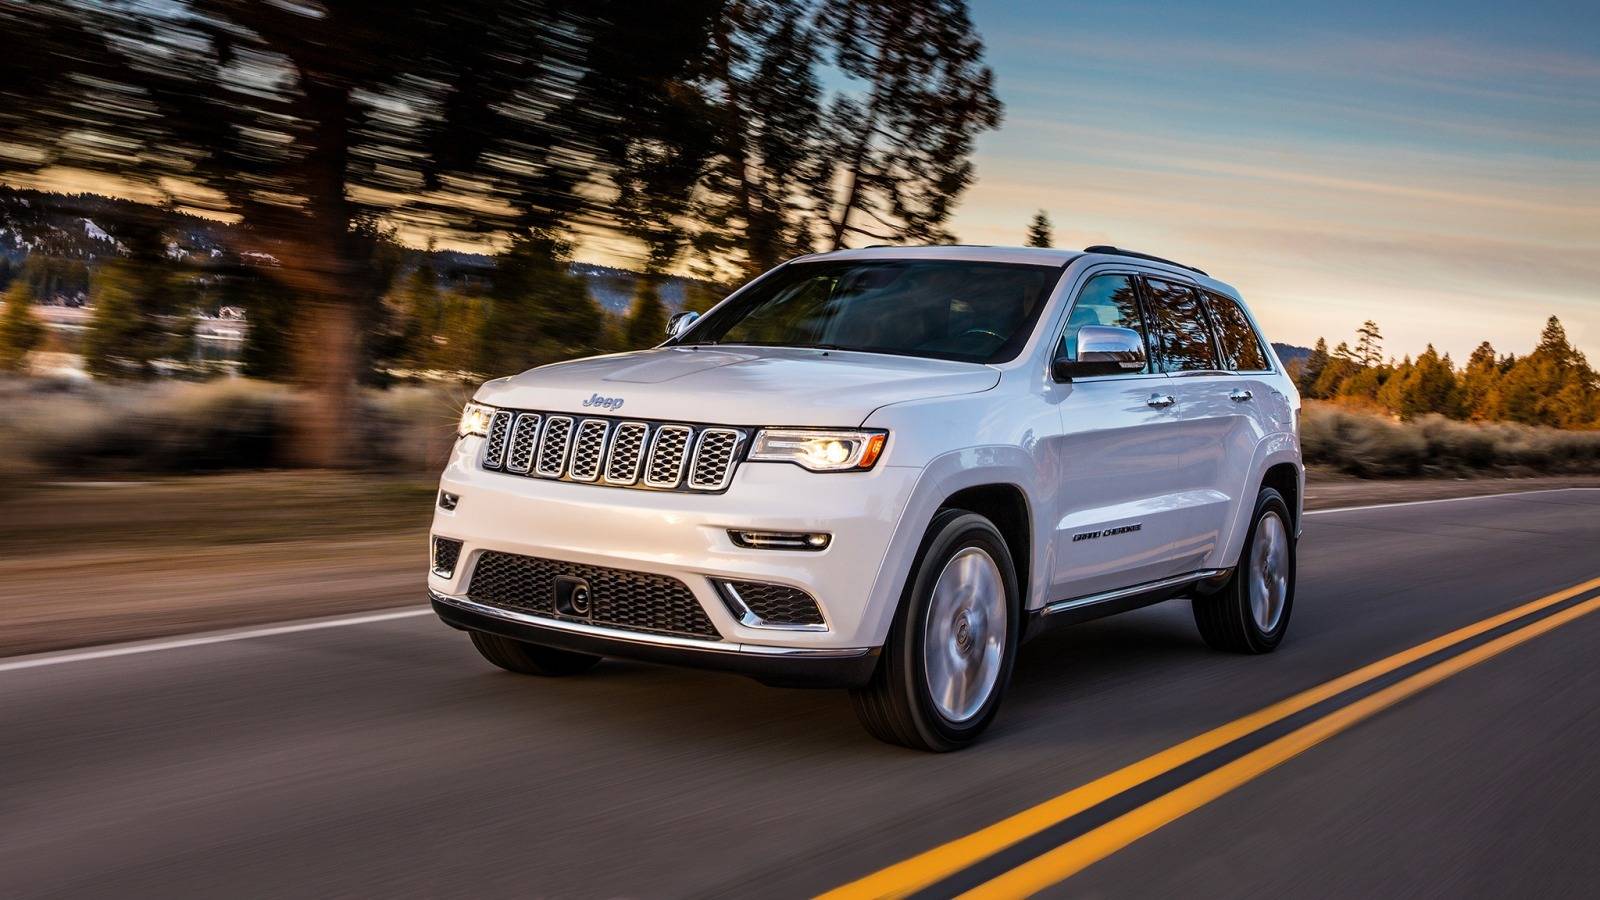 Jeep Grand Cherokee Prices, Reviews, and Picture